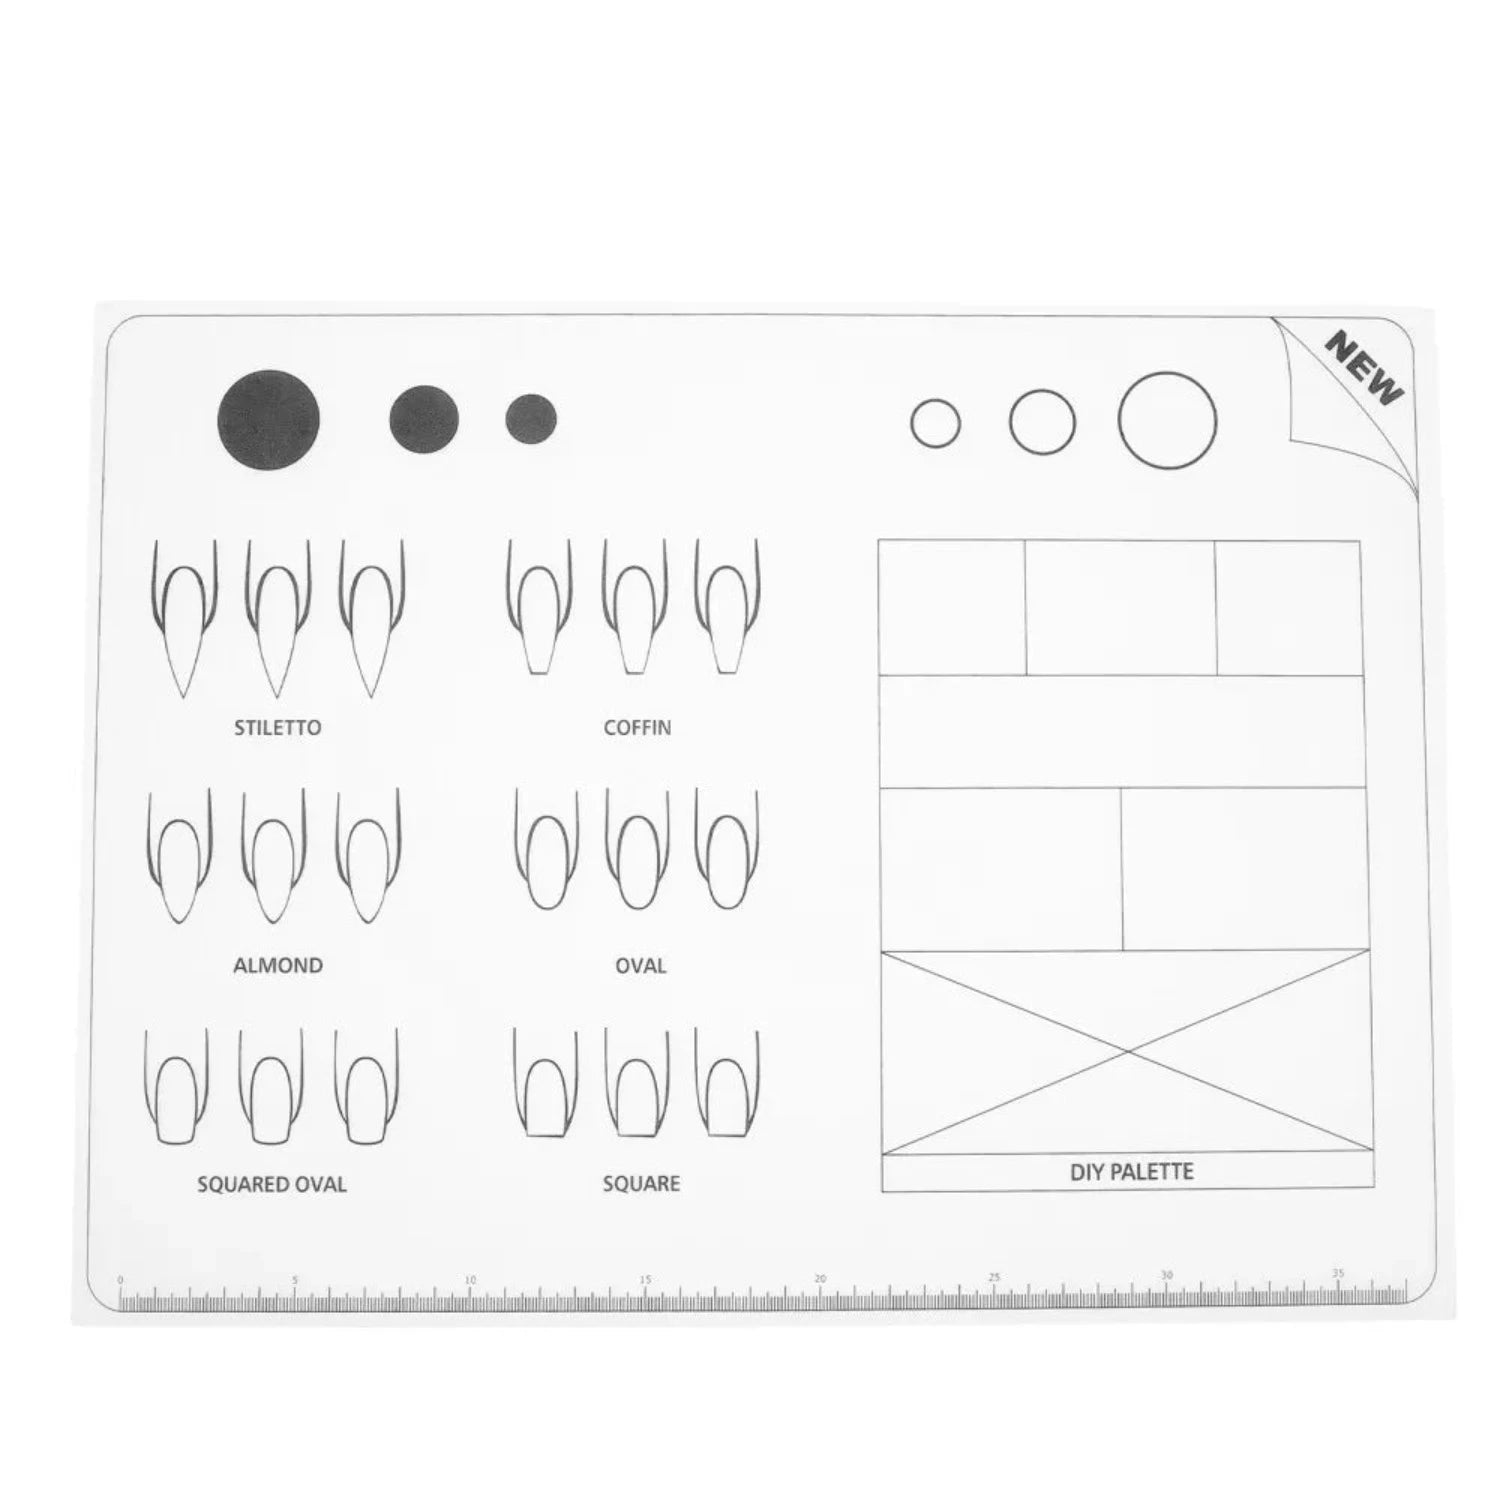 "Eco-friendly Reusable Silicone Nail Practice Mat with realistic nail templates for professional nail technicians and nail art enthusiasts"